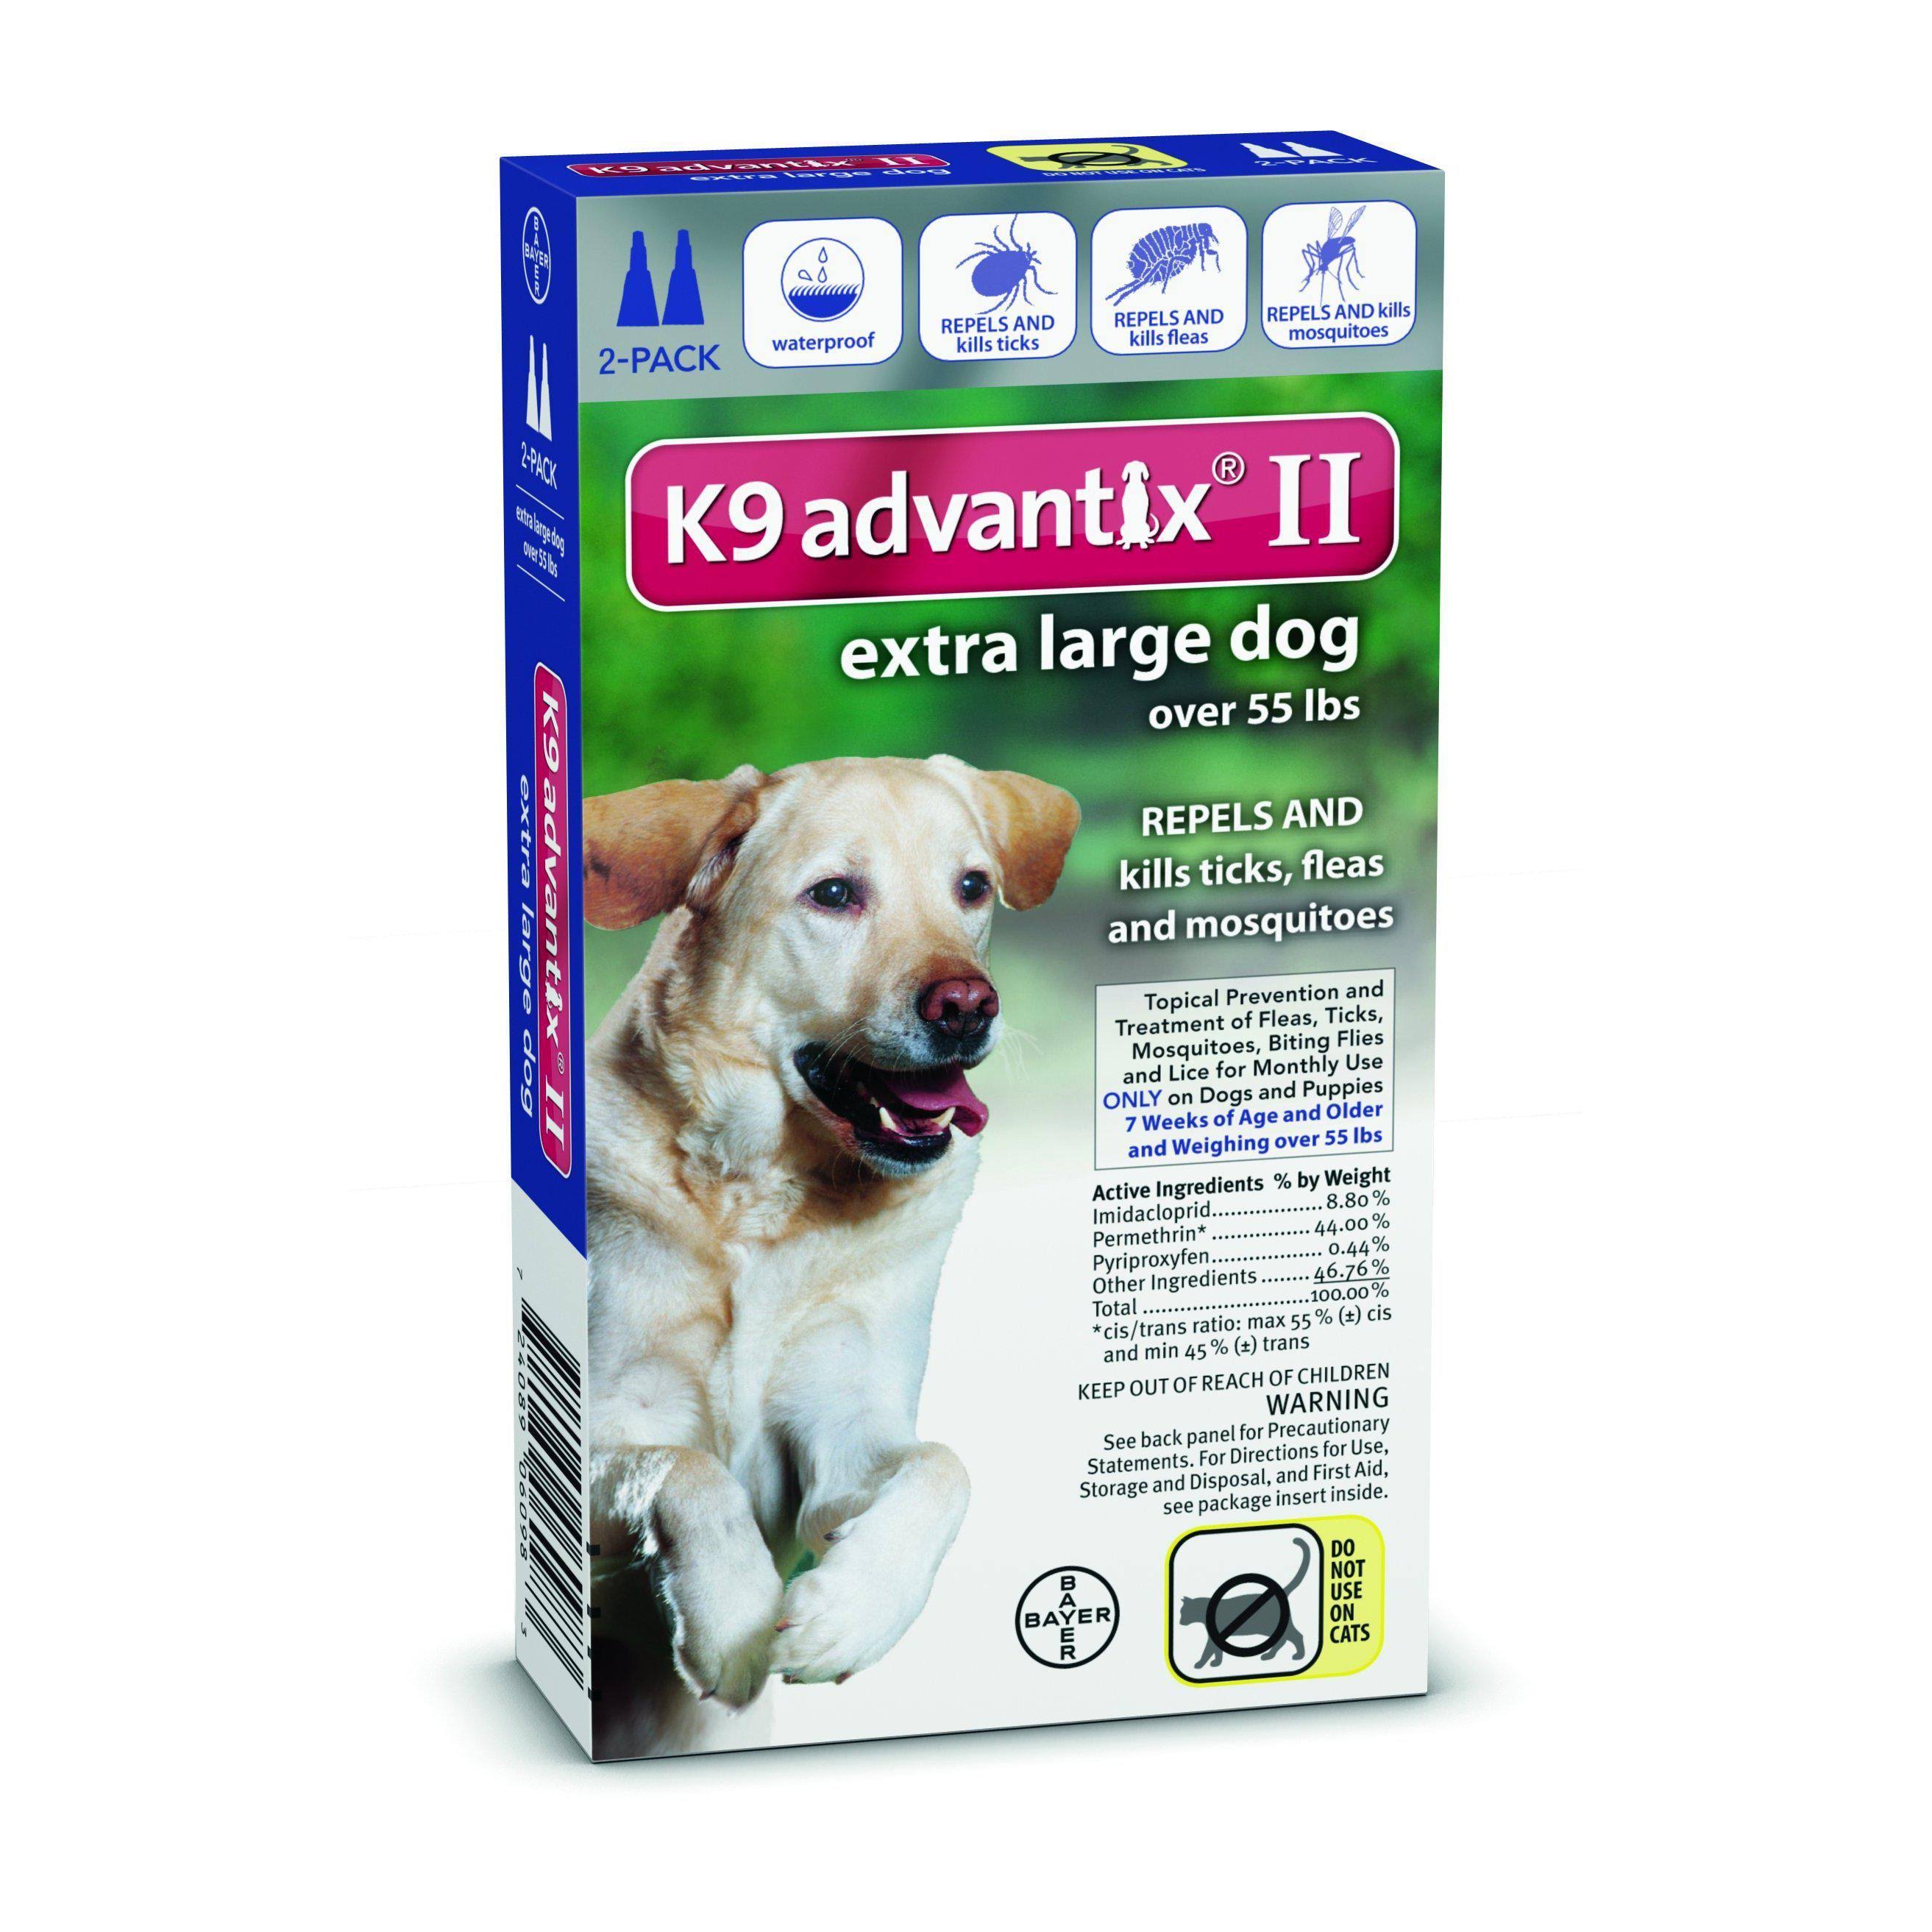 Bayer Healthcare K9 Advantix ll X-Large Dog Flea and Tick Prevention and Treatment - Over 55lb